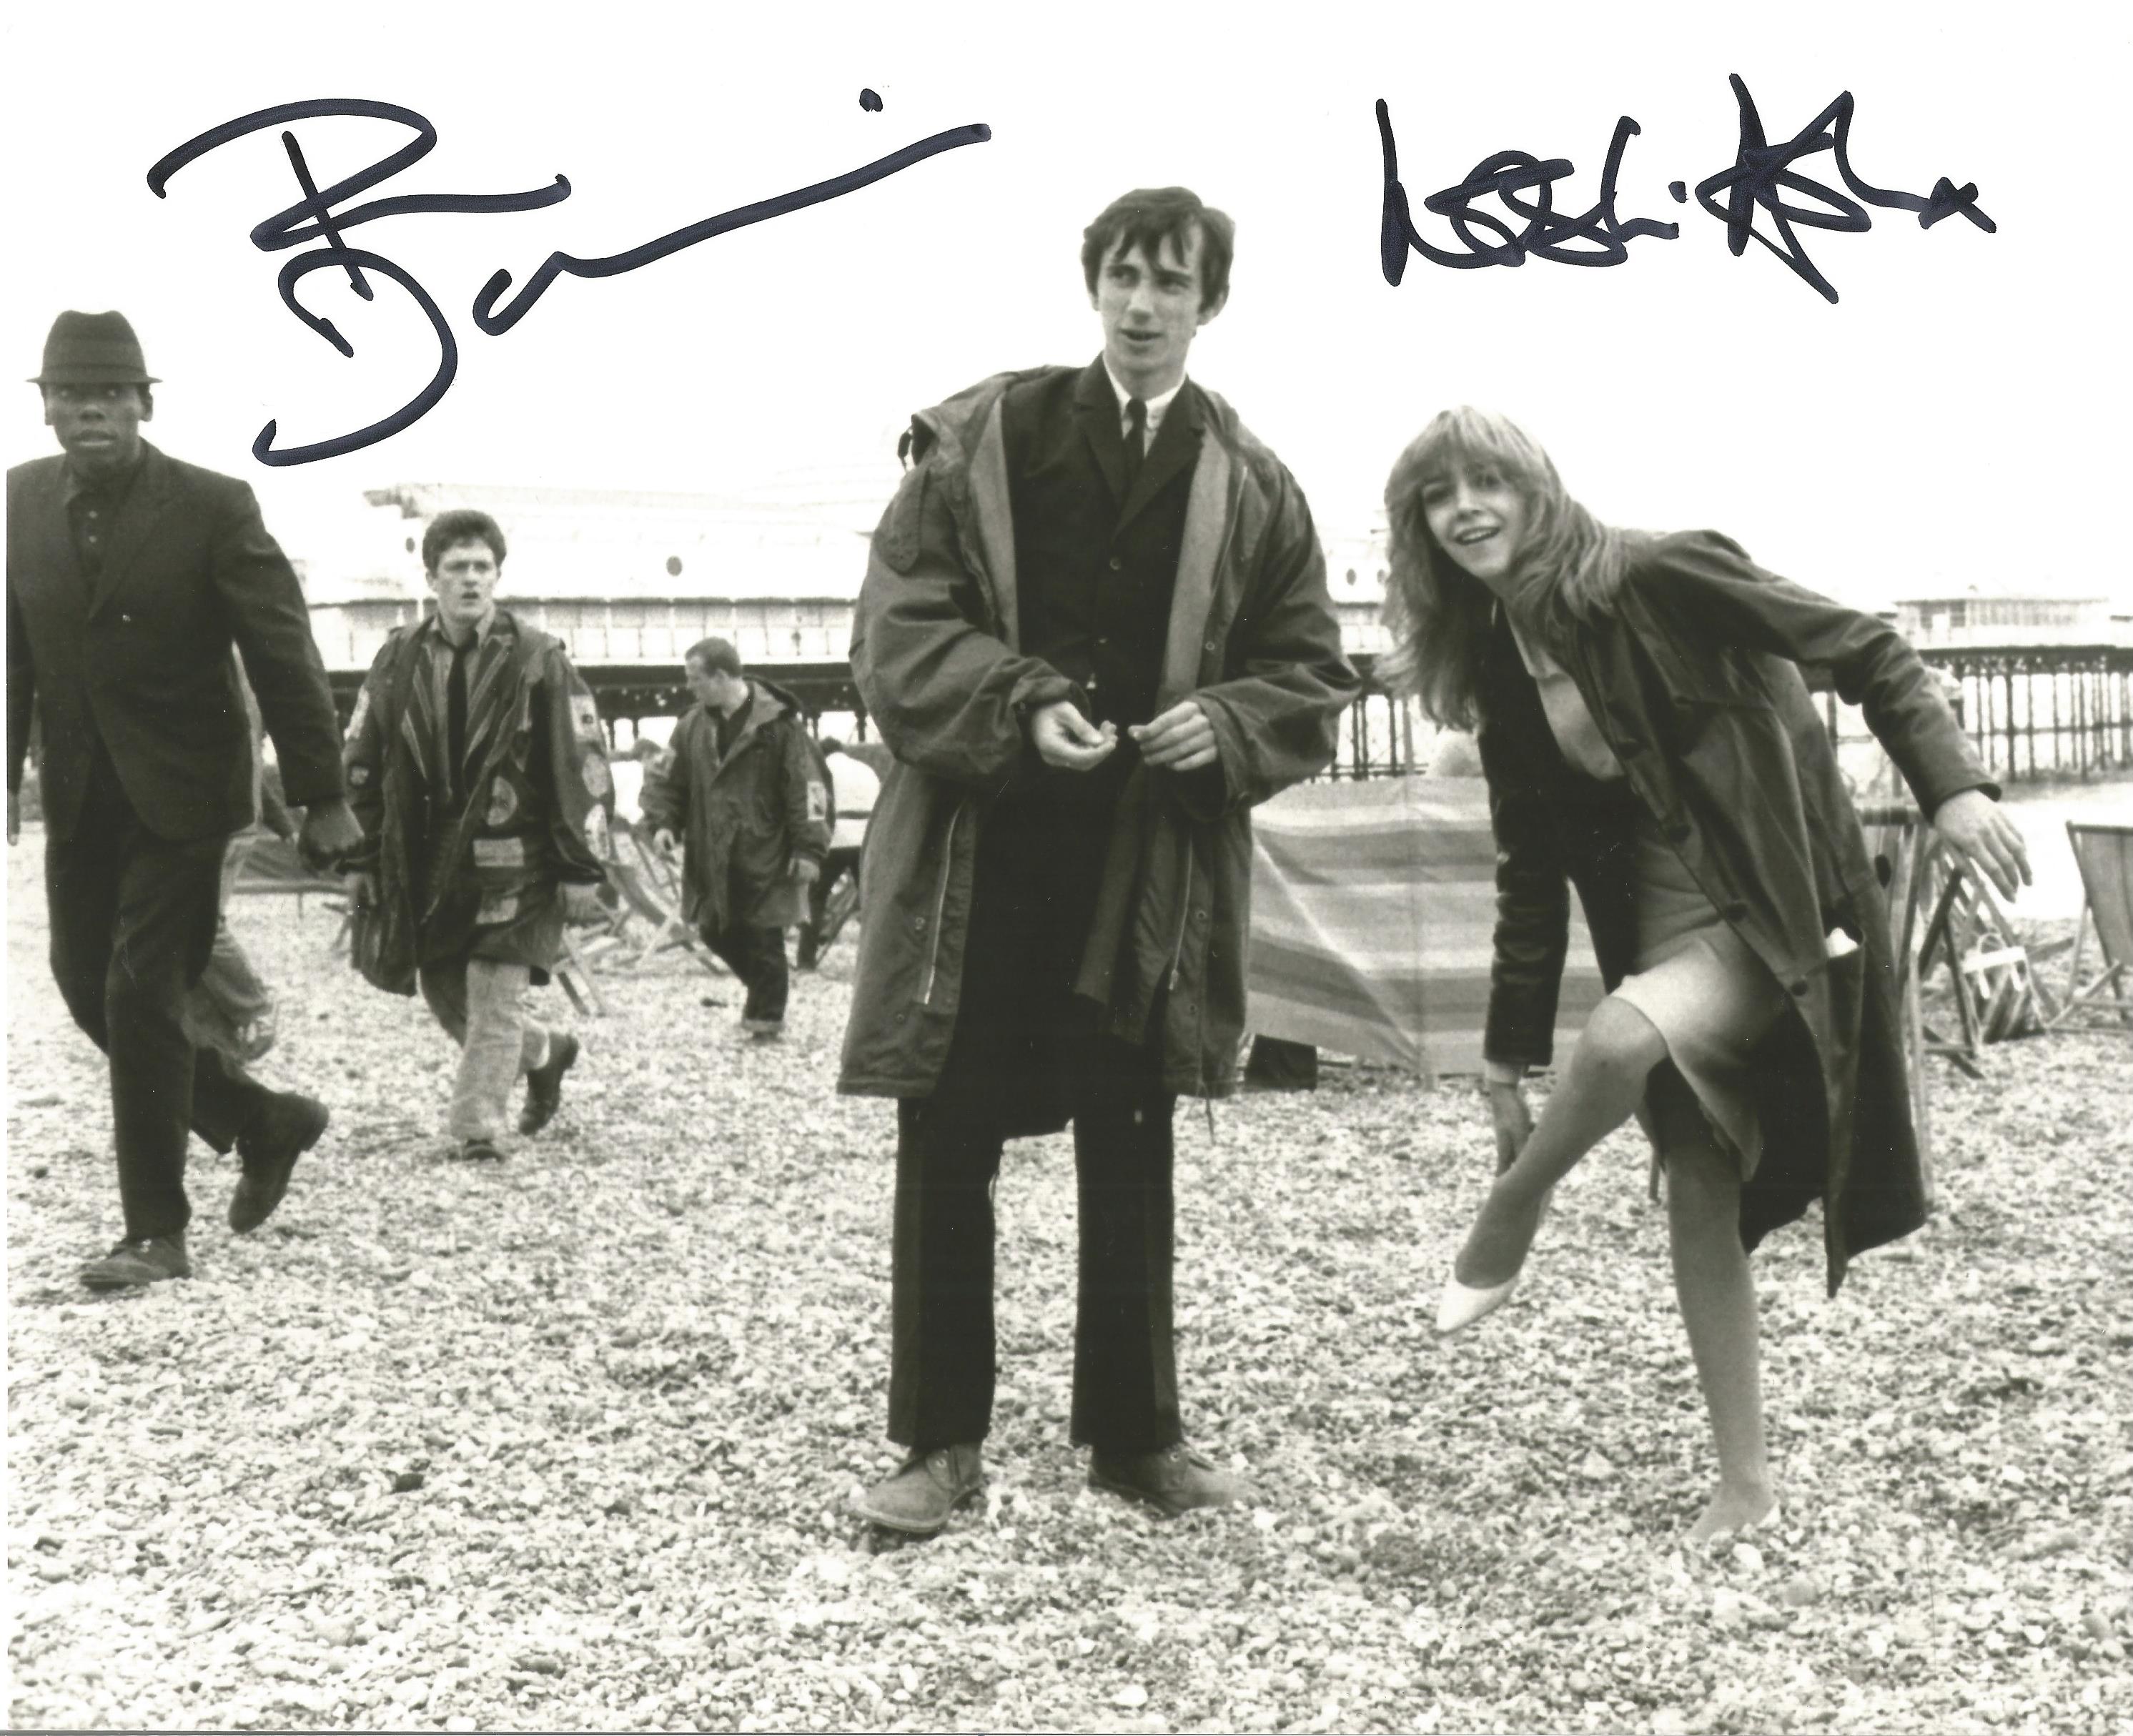 Quadrophenia Phil Daniels and Lesley Ash signed 10 x 8 inch b w photo, on the Beach. Good